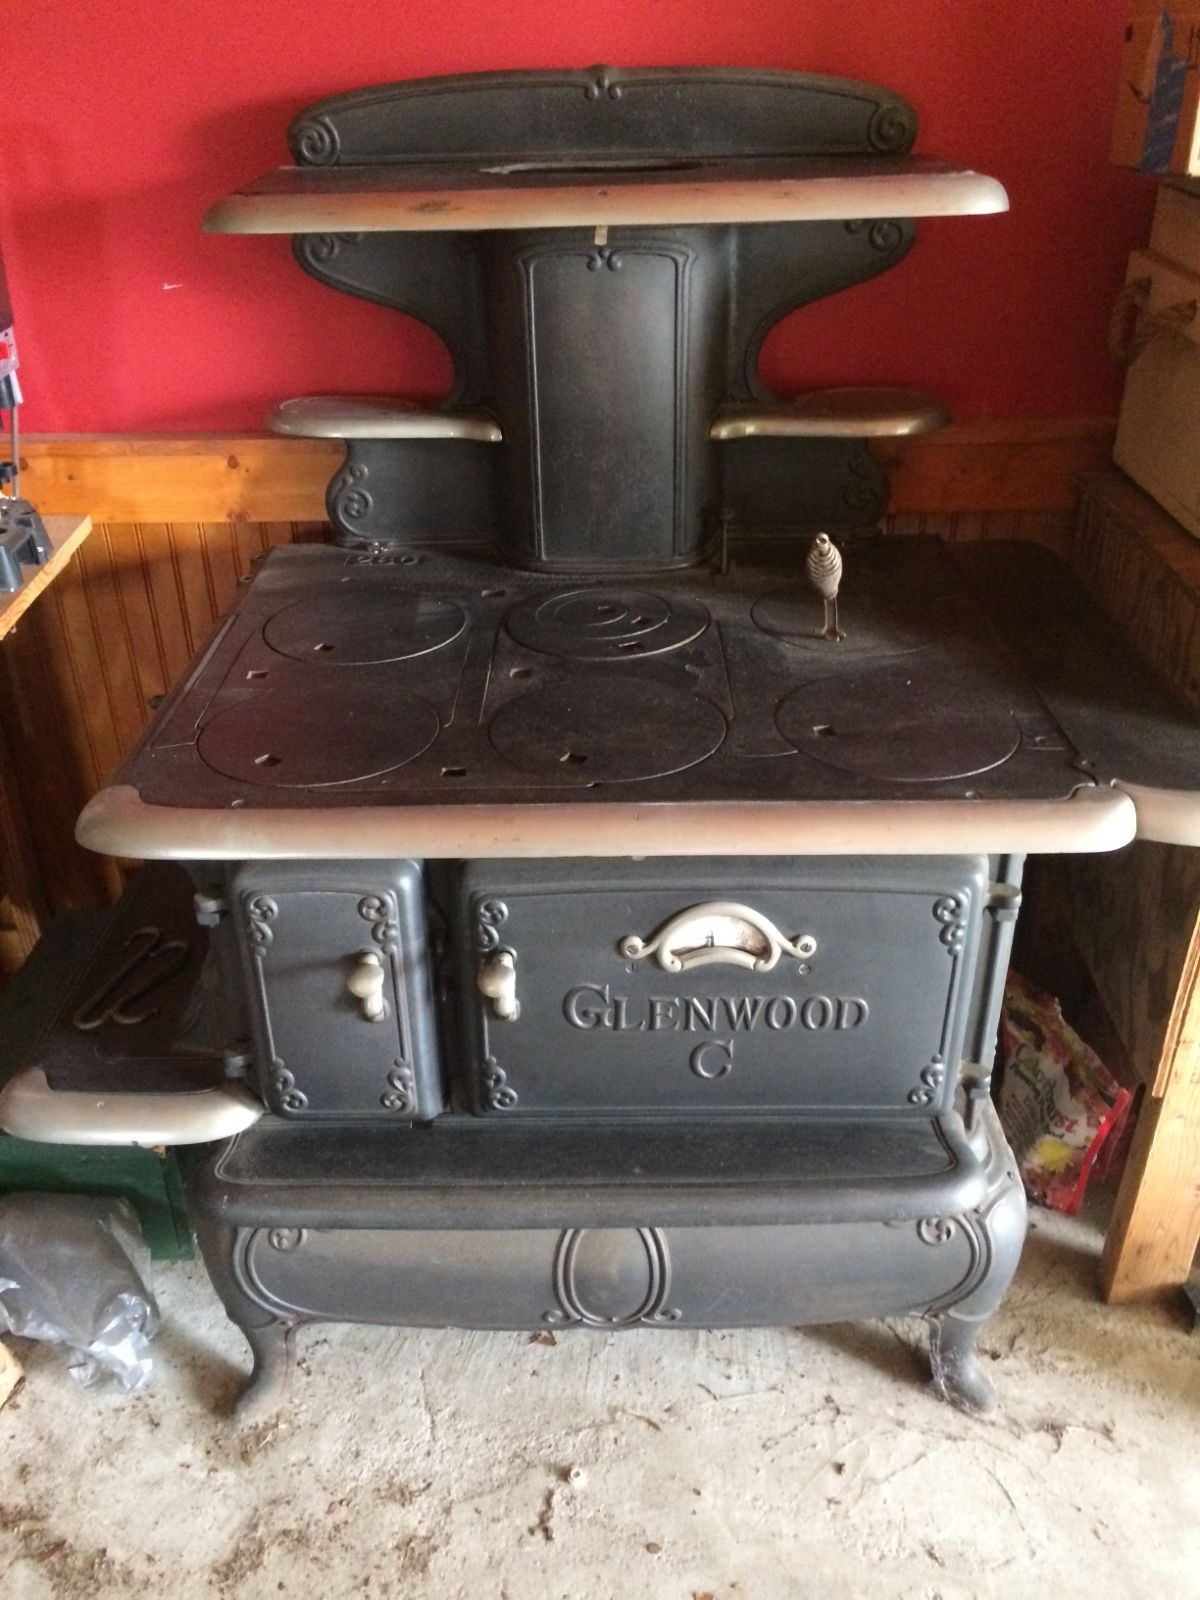 ●GLENWOOD ANTIQUE STOVE●1800's EARLY 1900's●WORKING CONDITION●